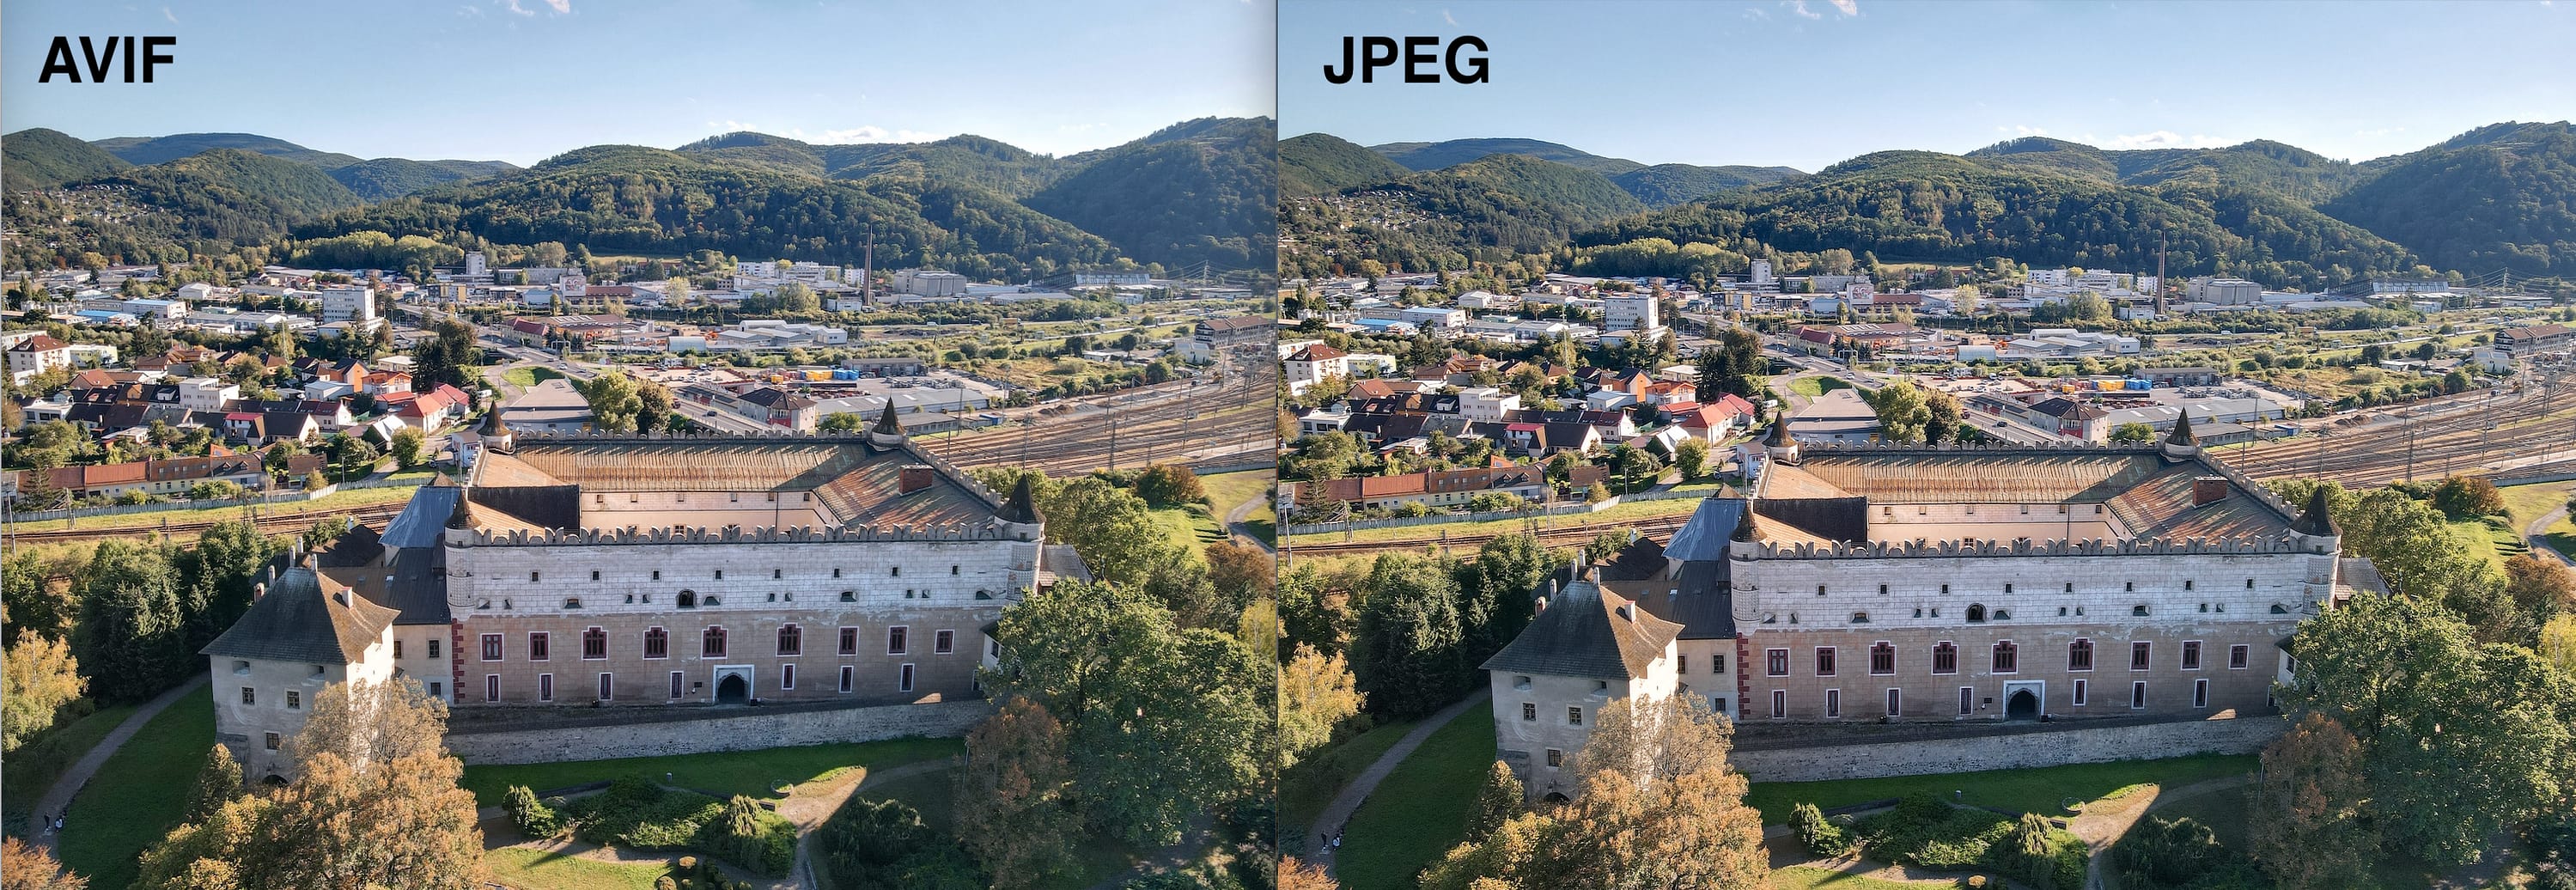 AVIF vs JPEG compared for the same image.